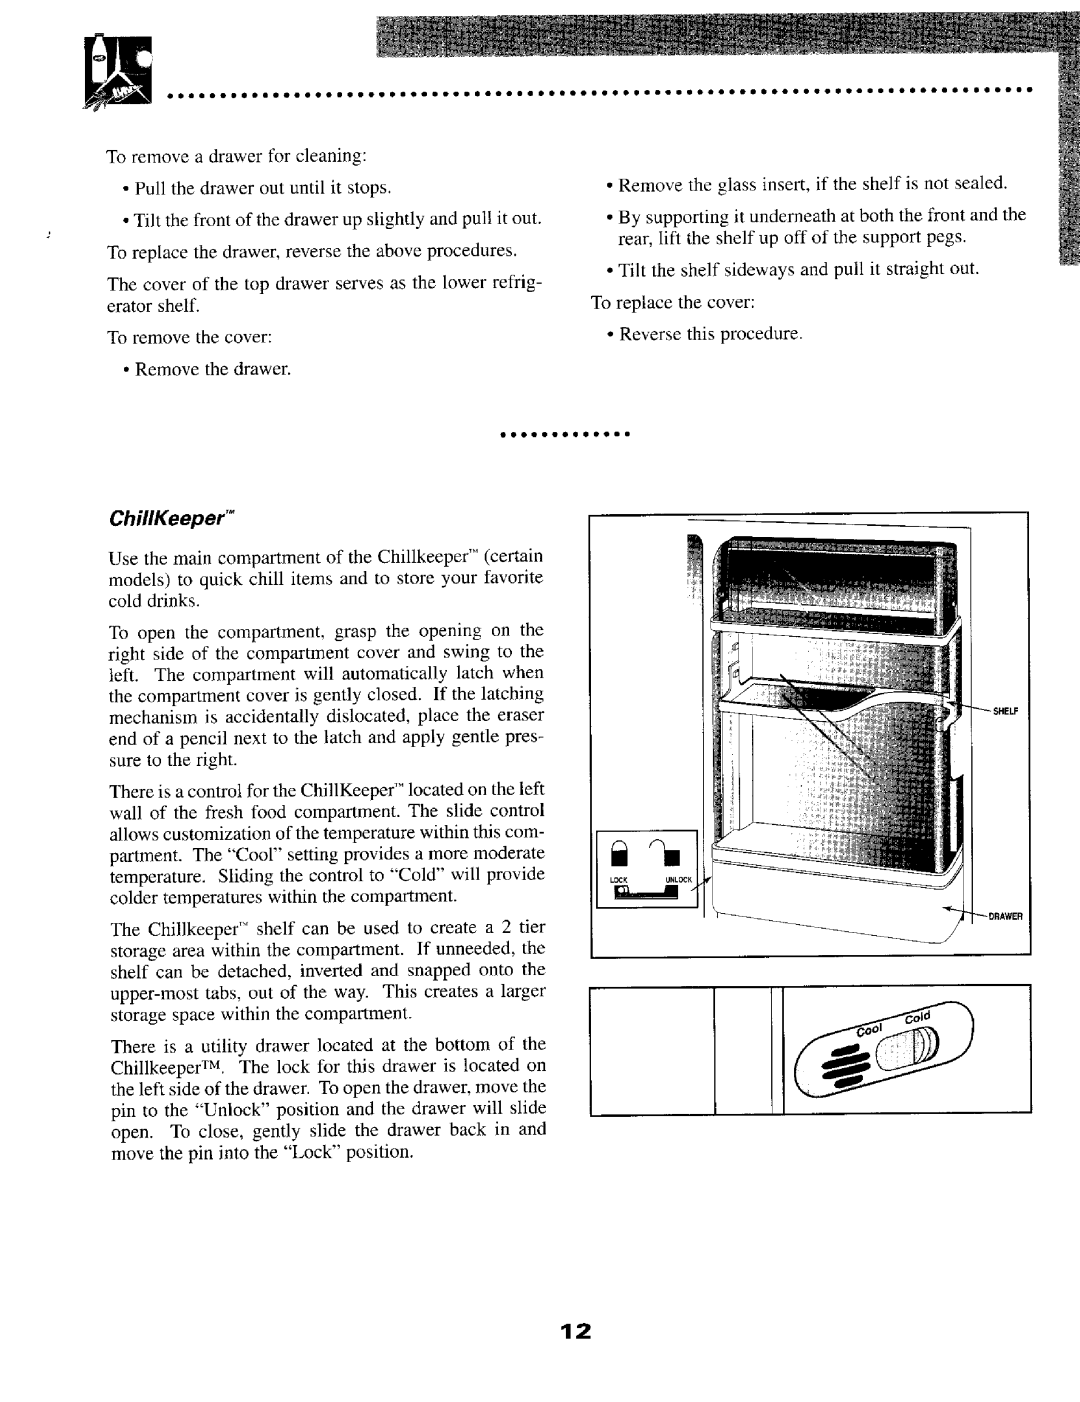 Maytag SS-2 warranty To remove a drawer for cleaning, ChillKeepeF 